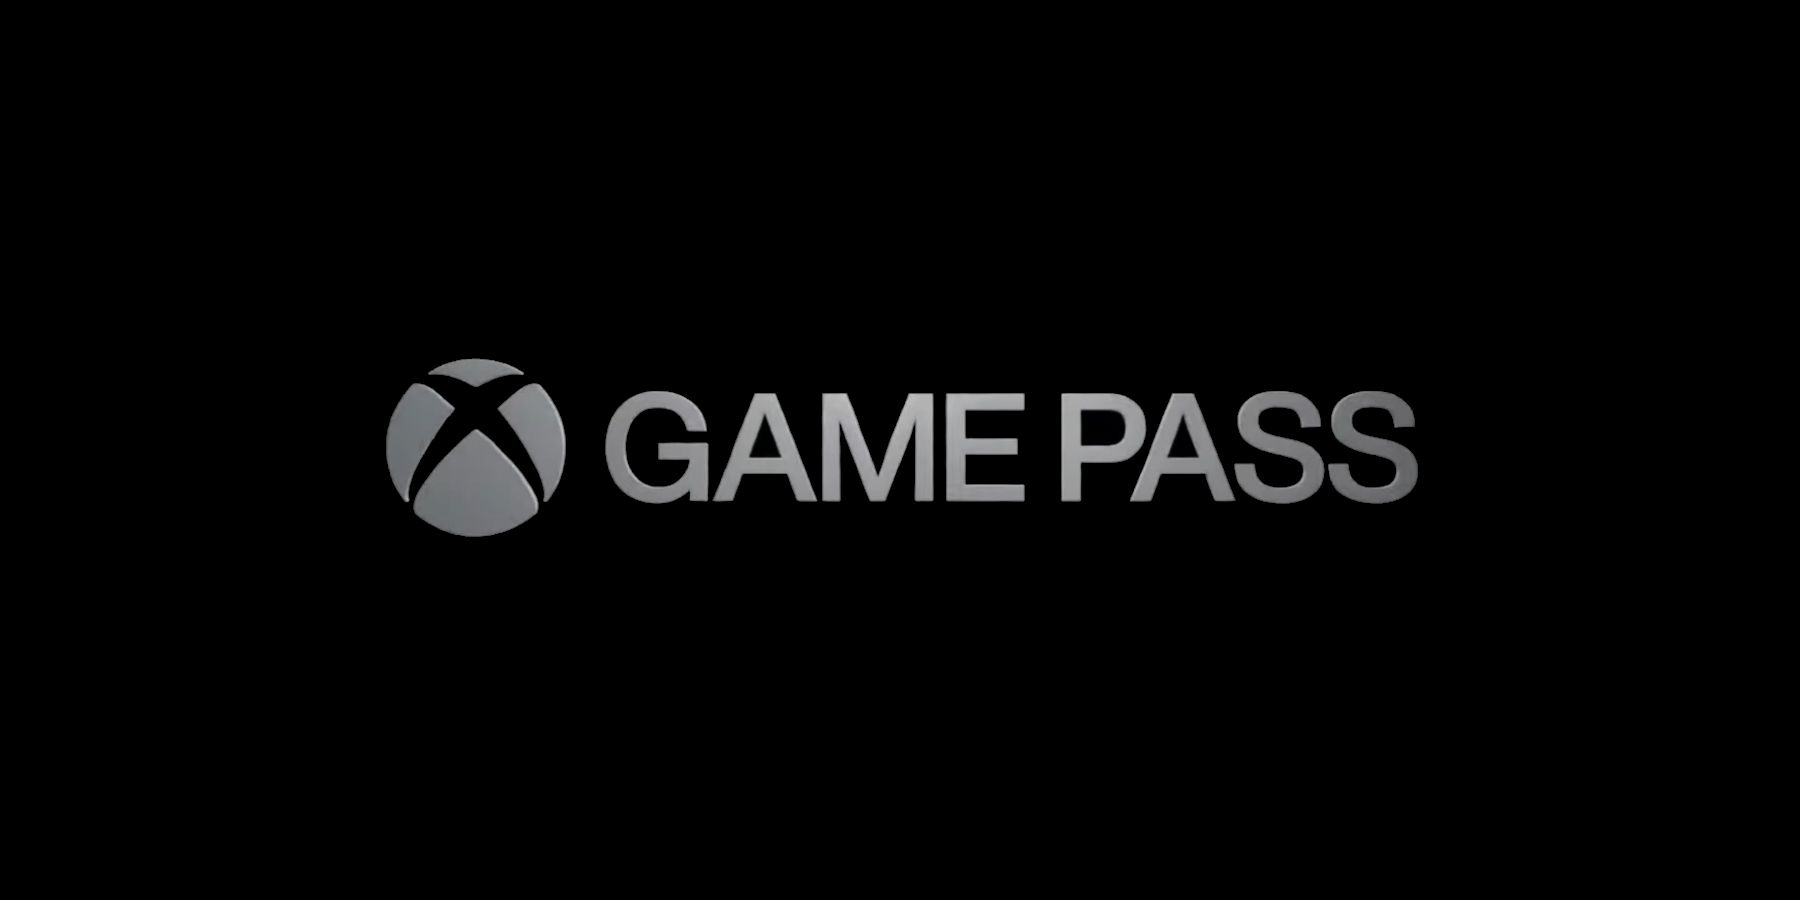 Back 4 Blood is coming to Xbox Game Pass on day one - Polygon